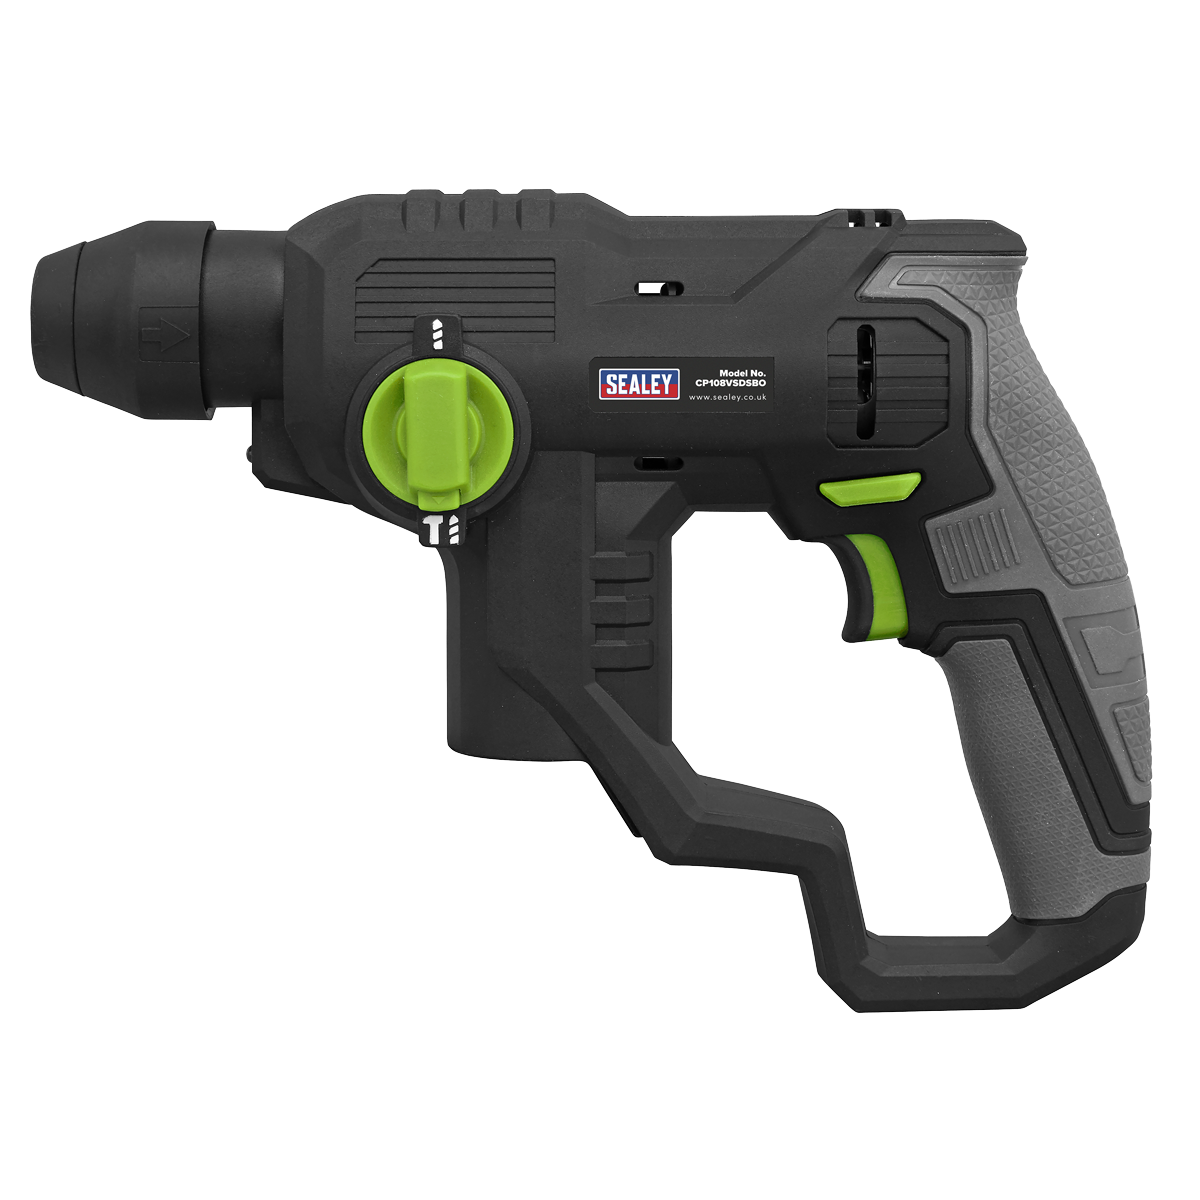 Sealey Rotary and rotary with hammer mode drill